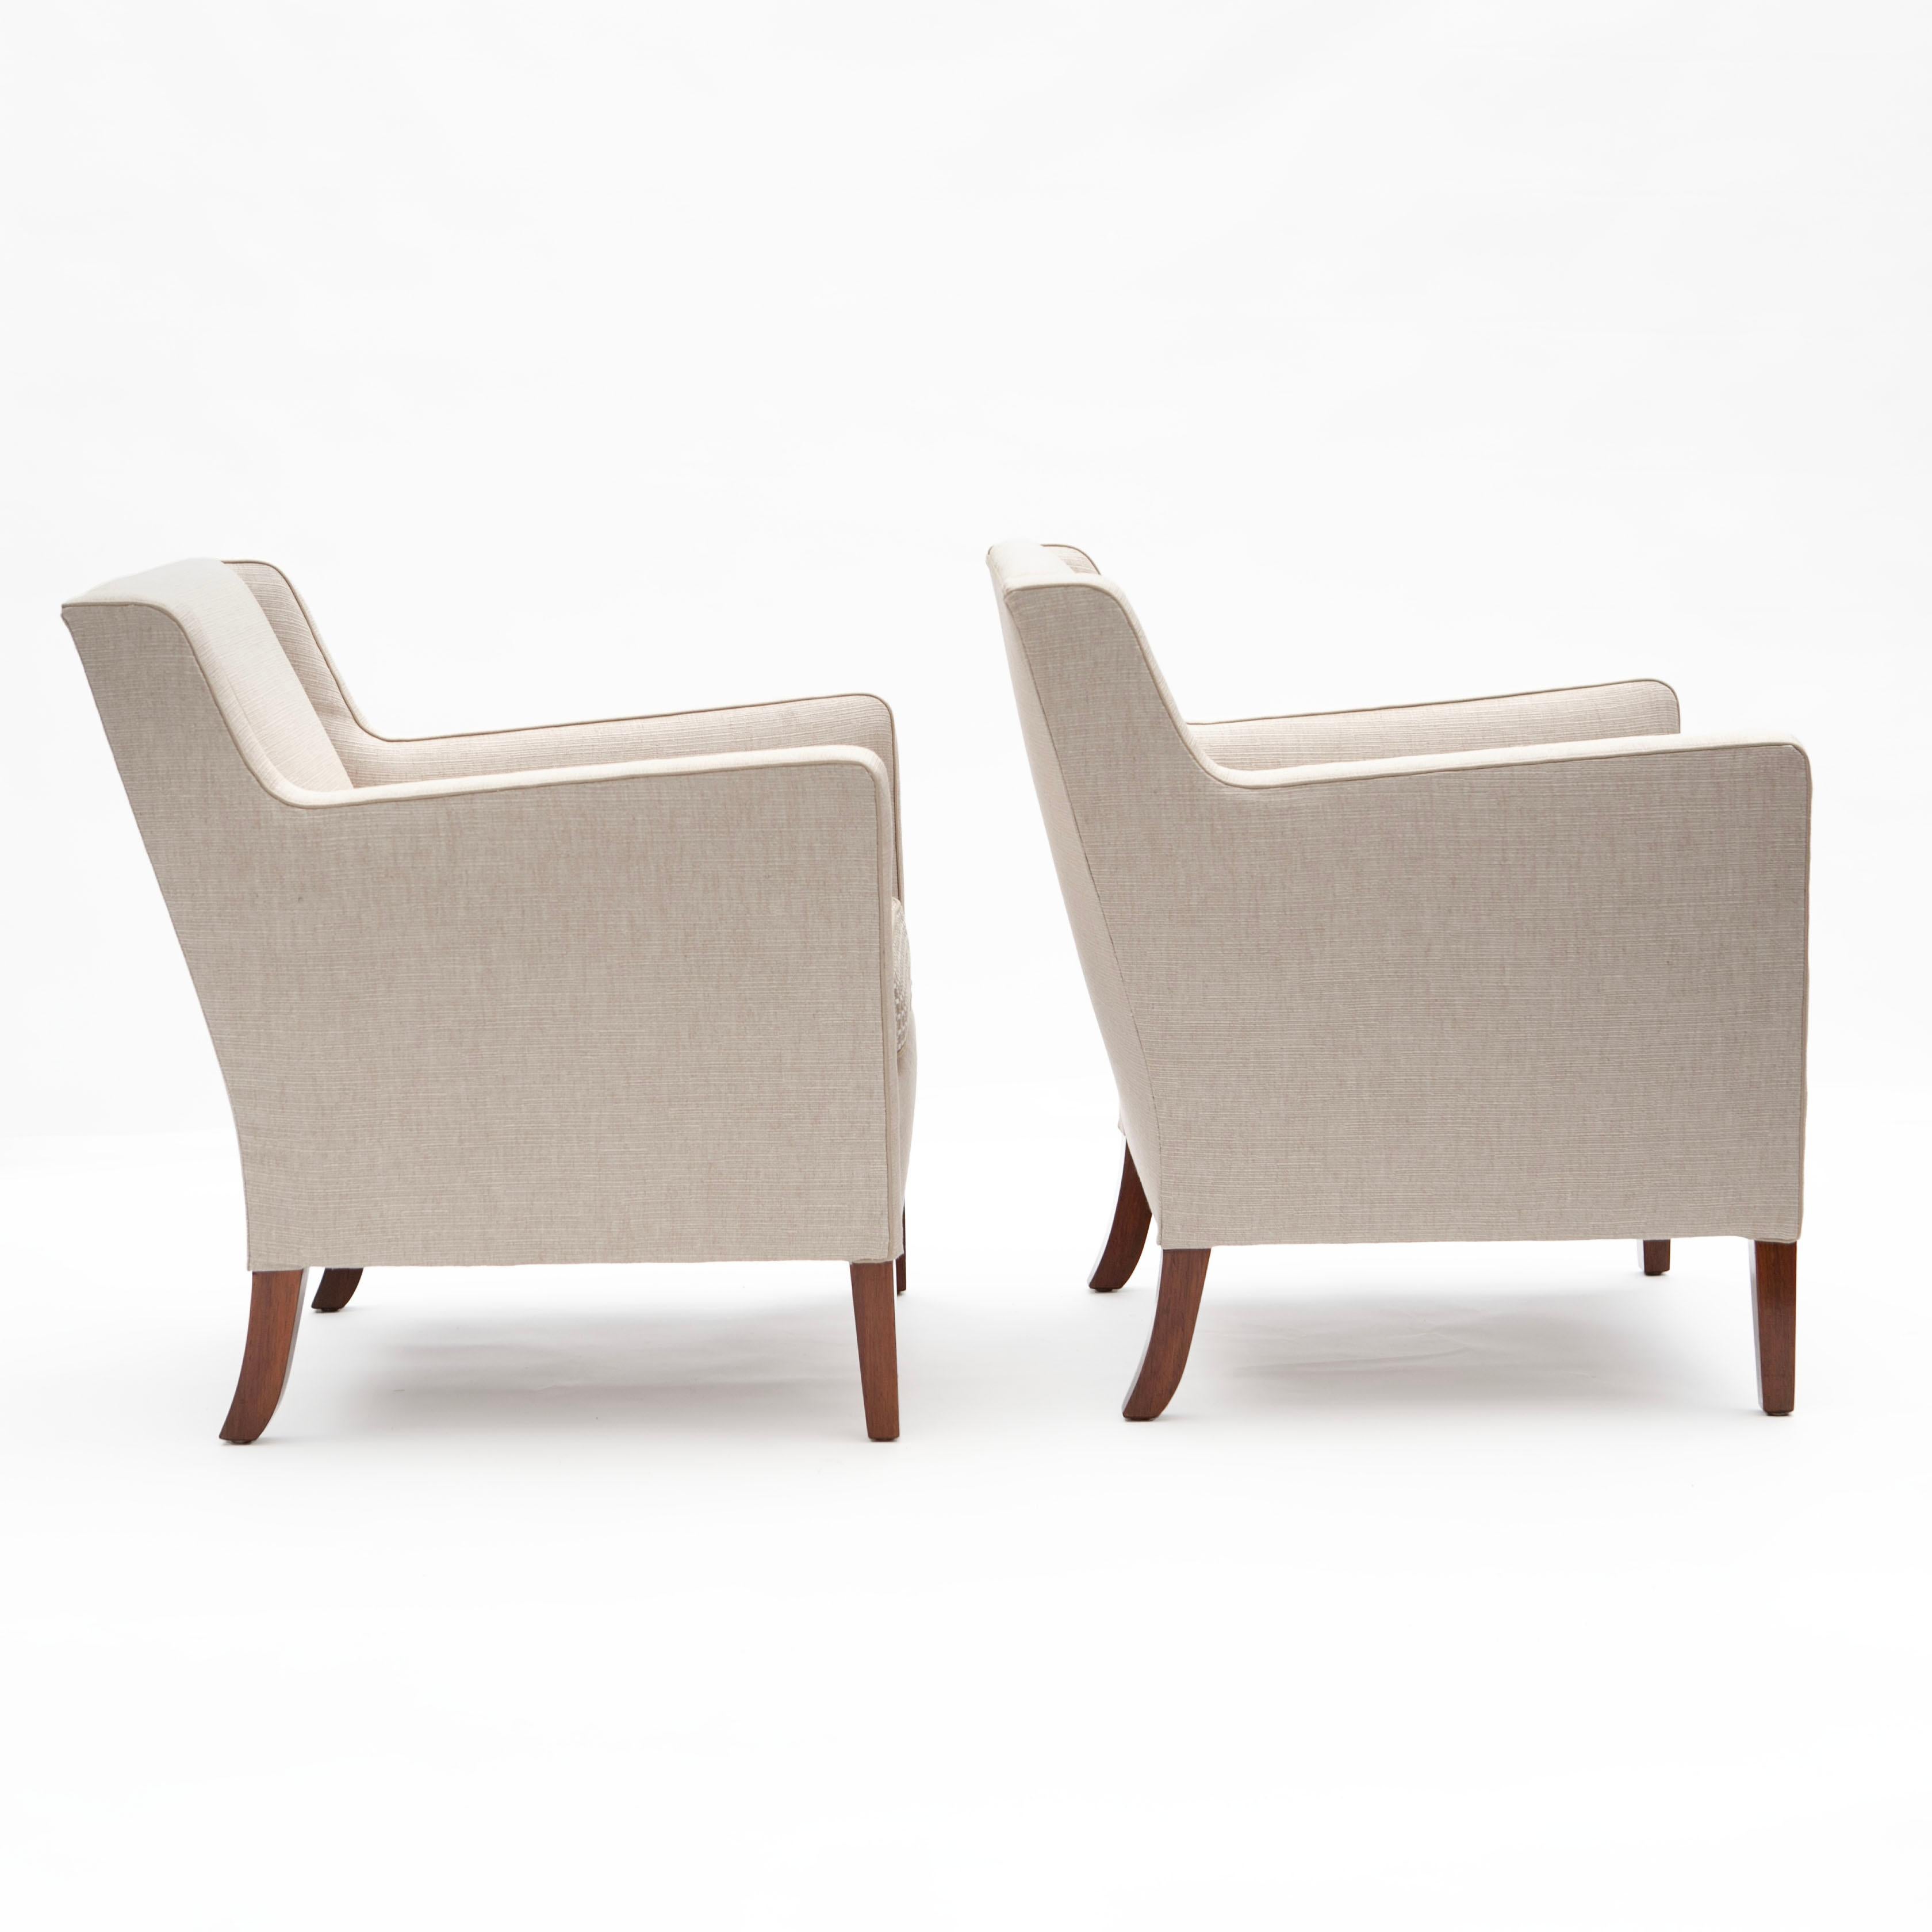 Pair of Frits Henningsen Lounge Chairs In Light Fabric. Denmark 1950's In Good Condition For Sale In Kastrup, DK